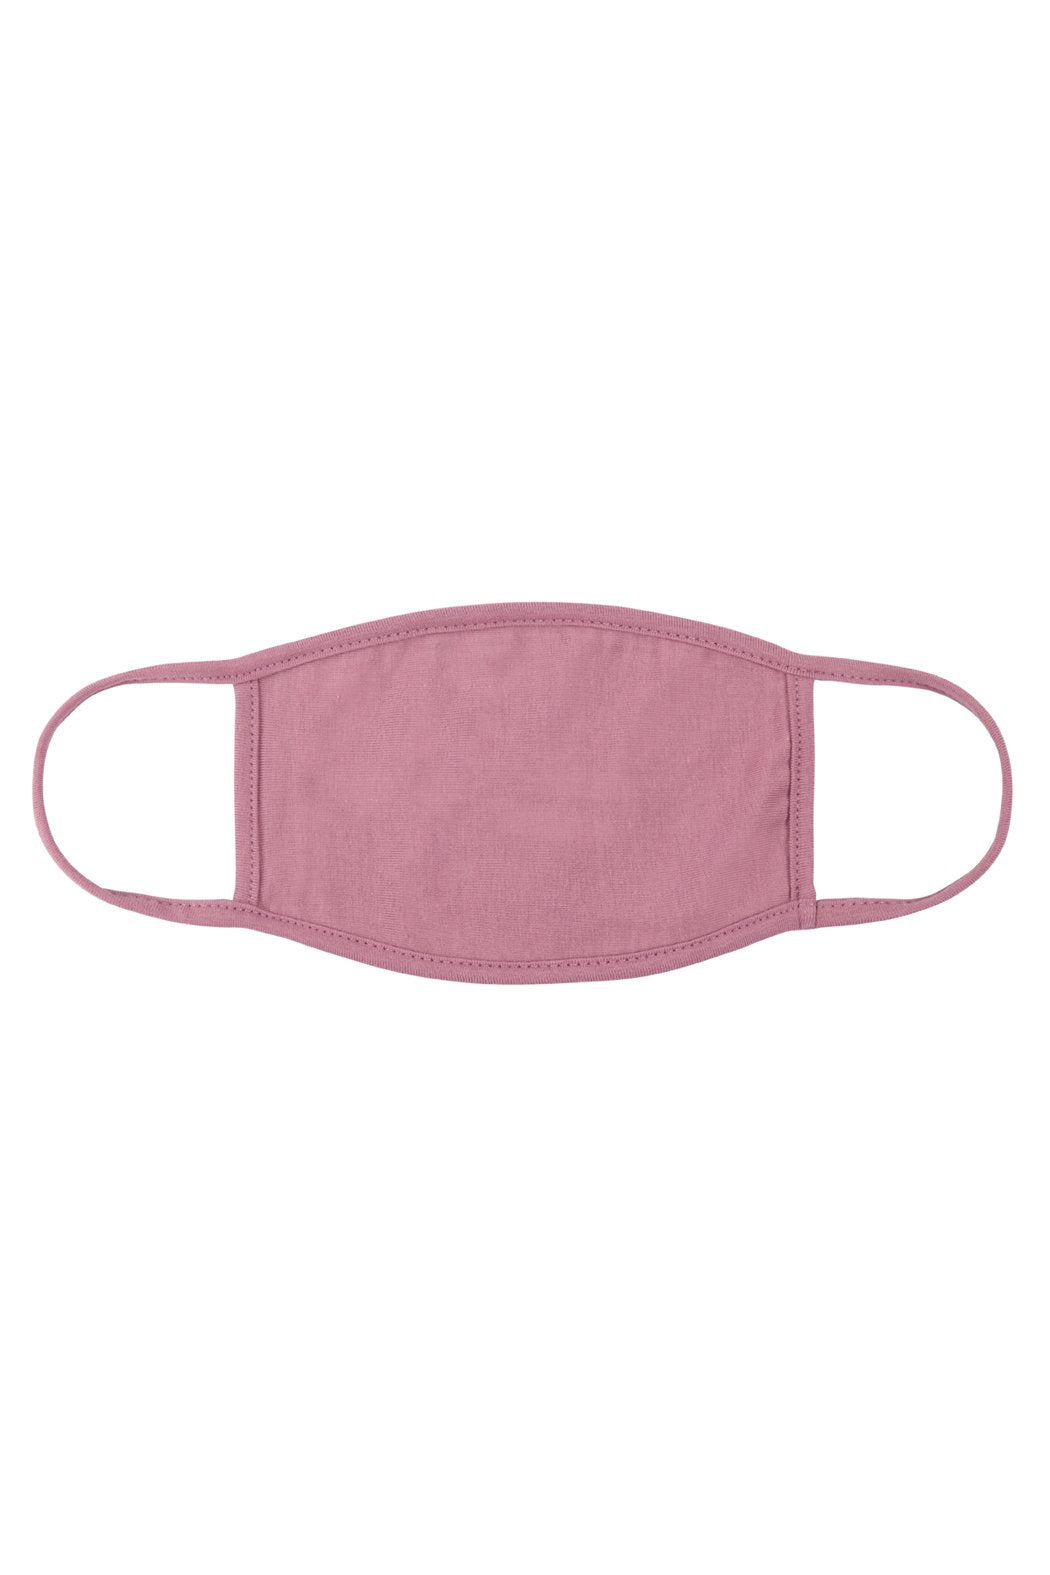 Rfm8002-Ct - Plain Reusable Face Mask for Adults With Filter Pocket